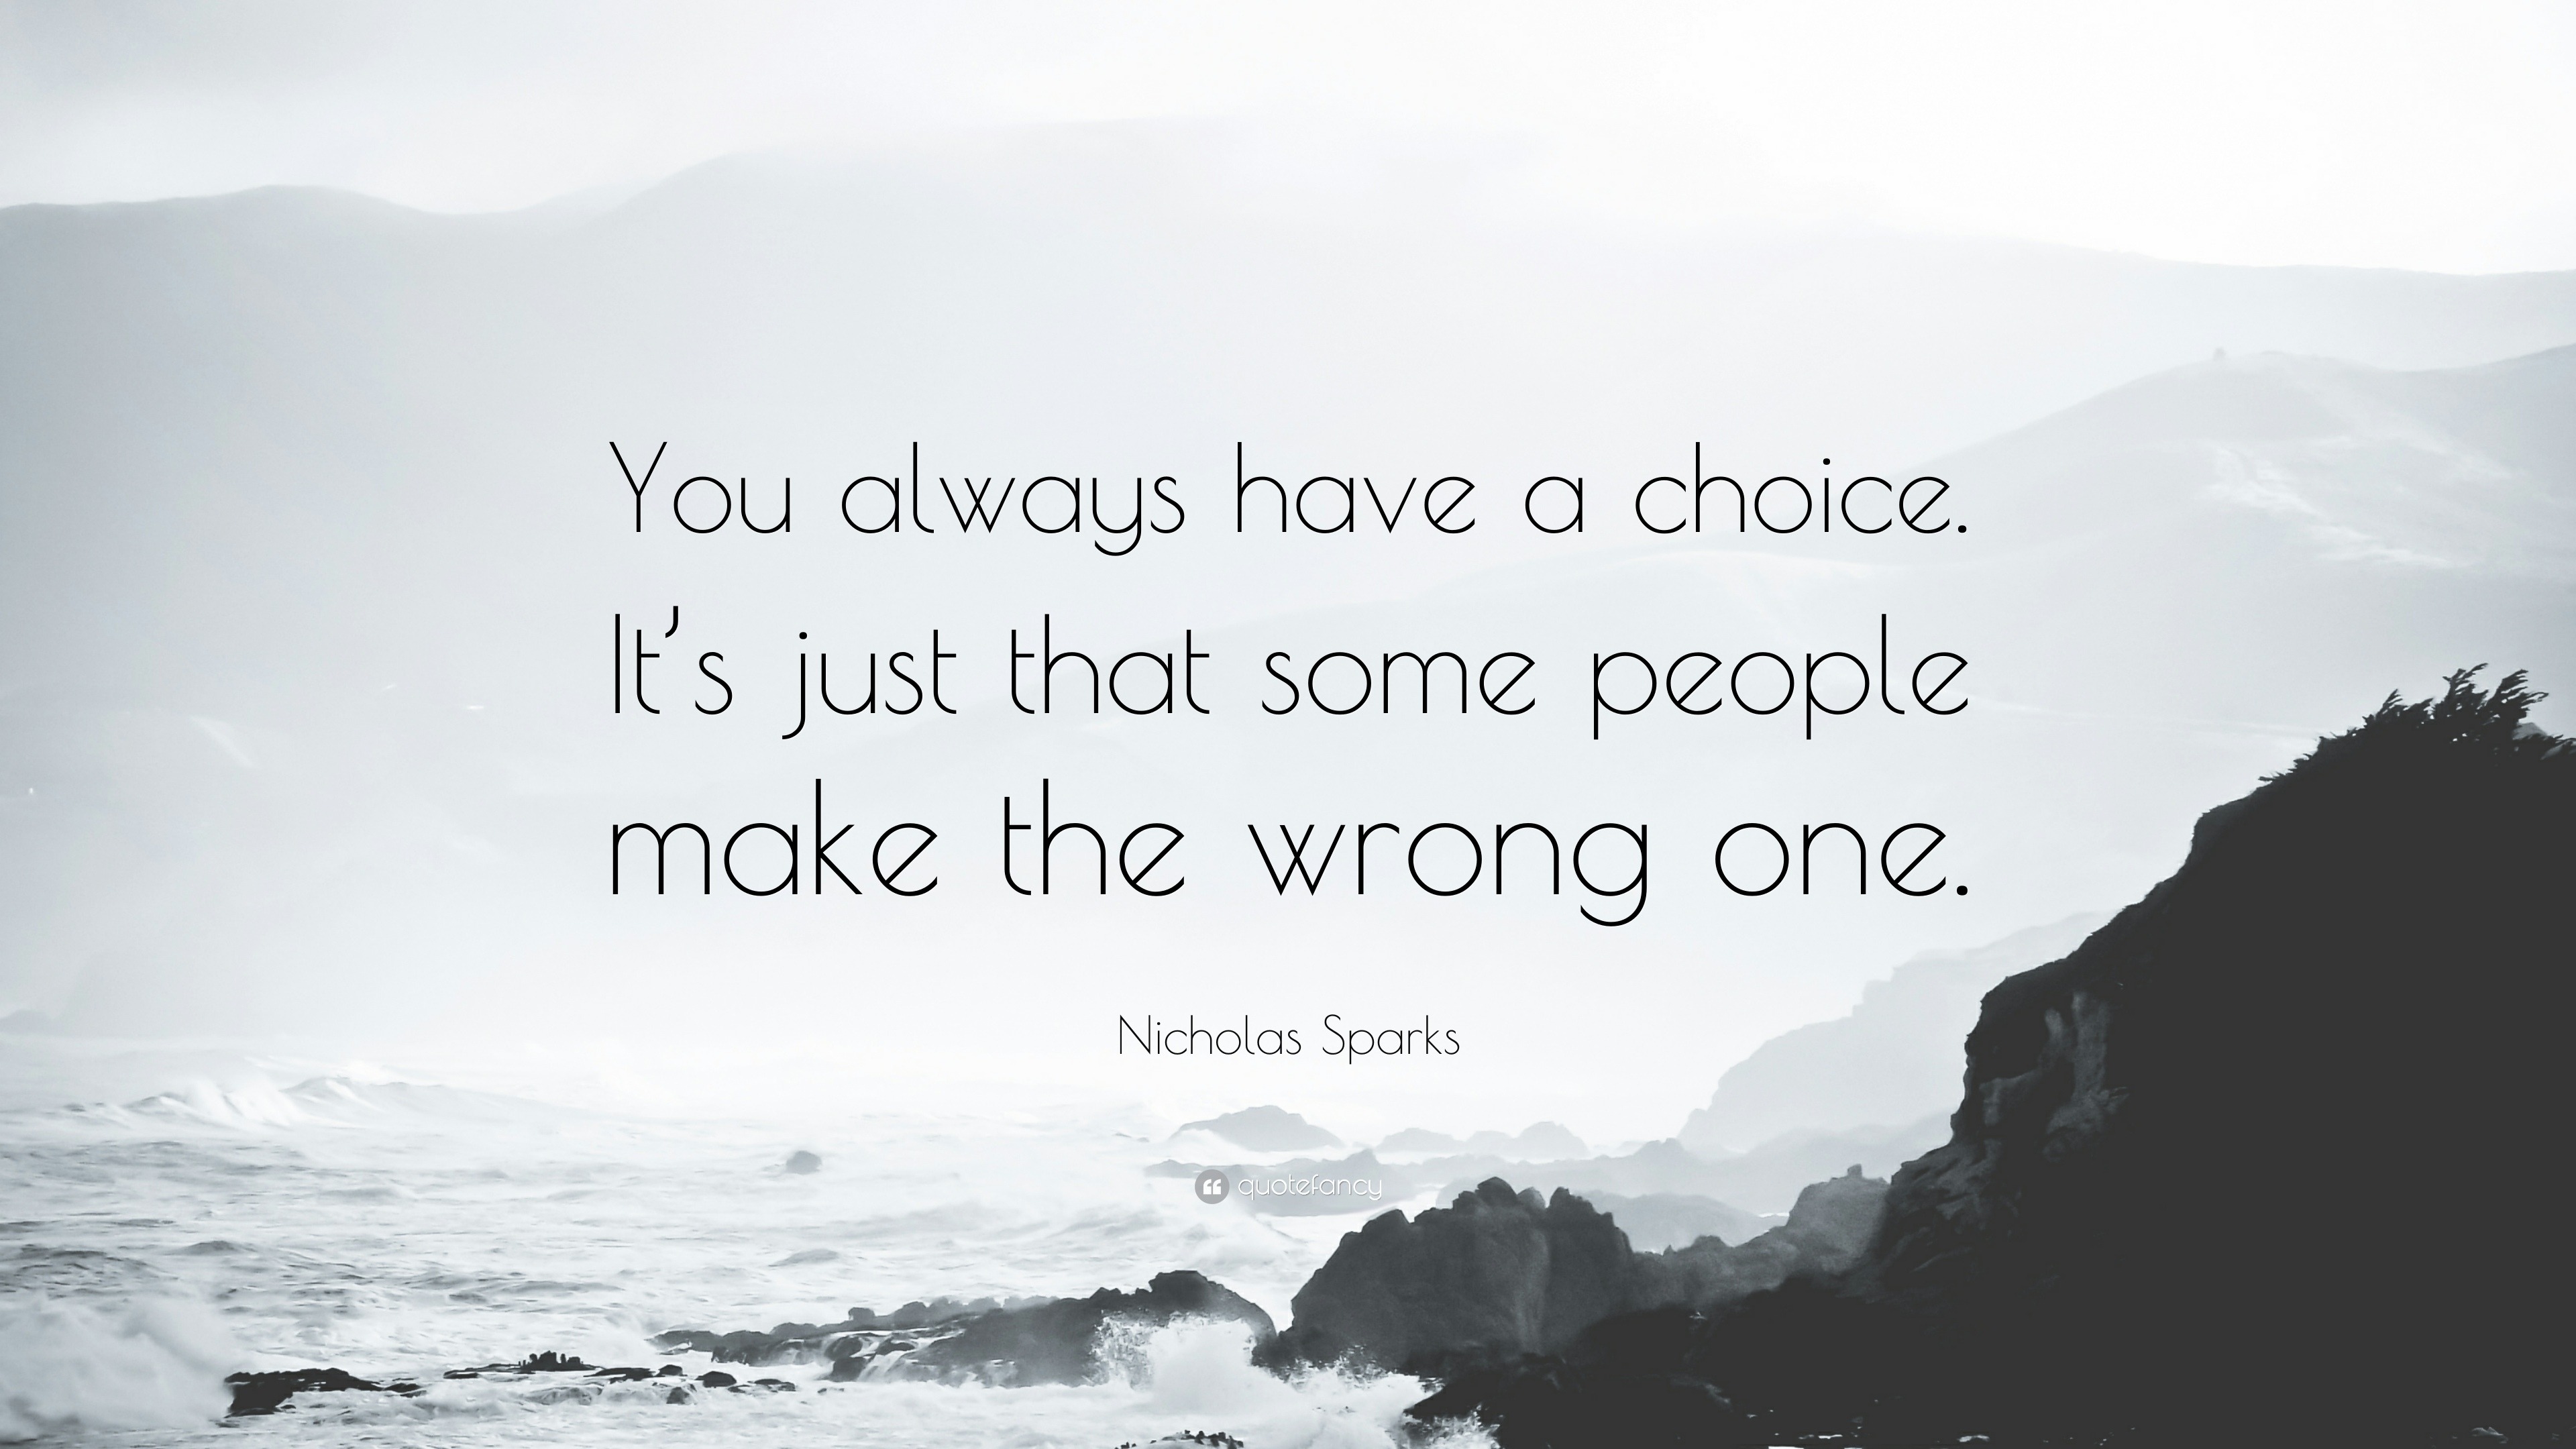 Nicholas Sparks Quote: “You Always Have A Choice. It's Just That Some People Make The Wrong